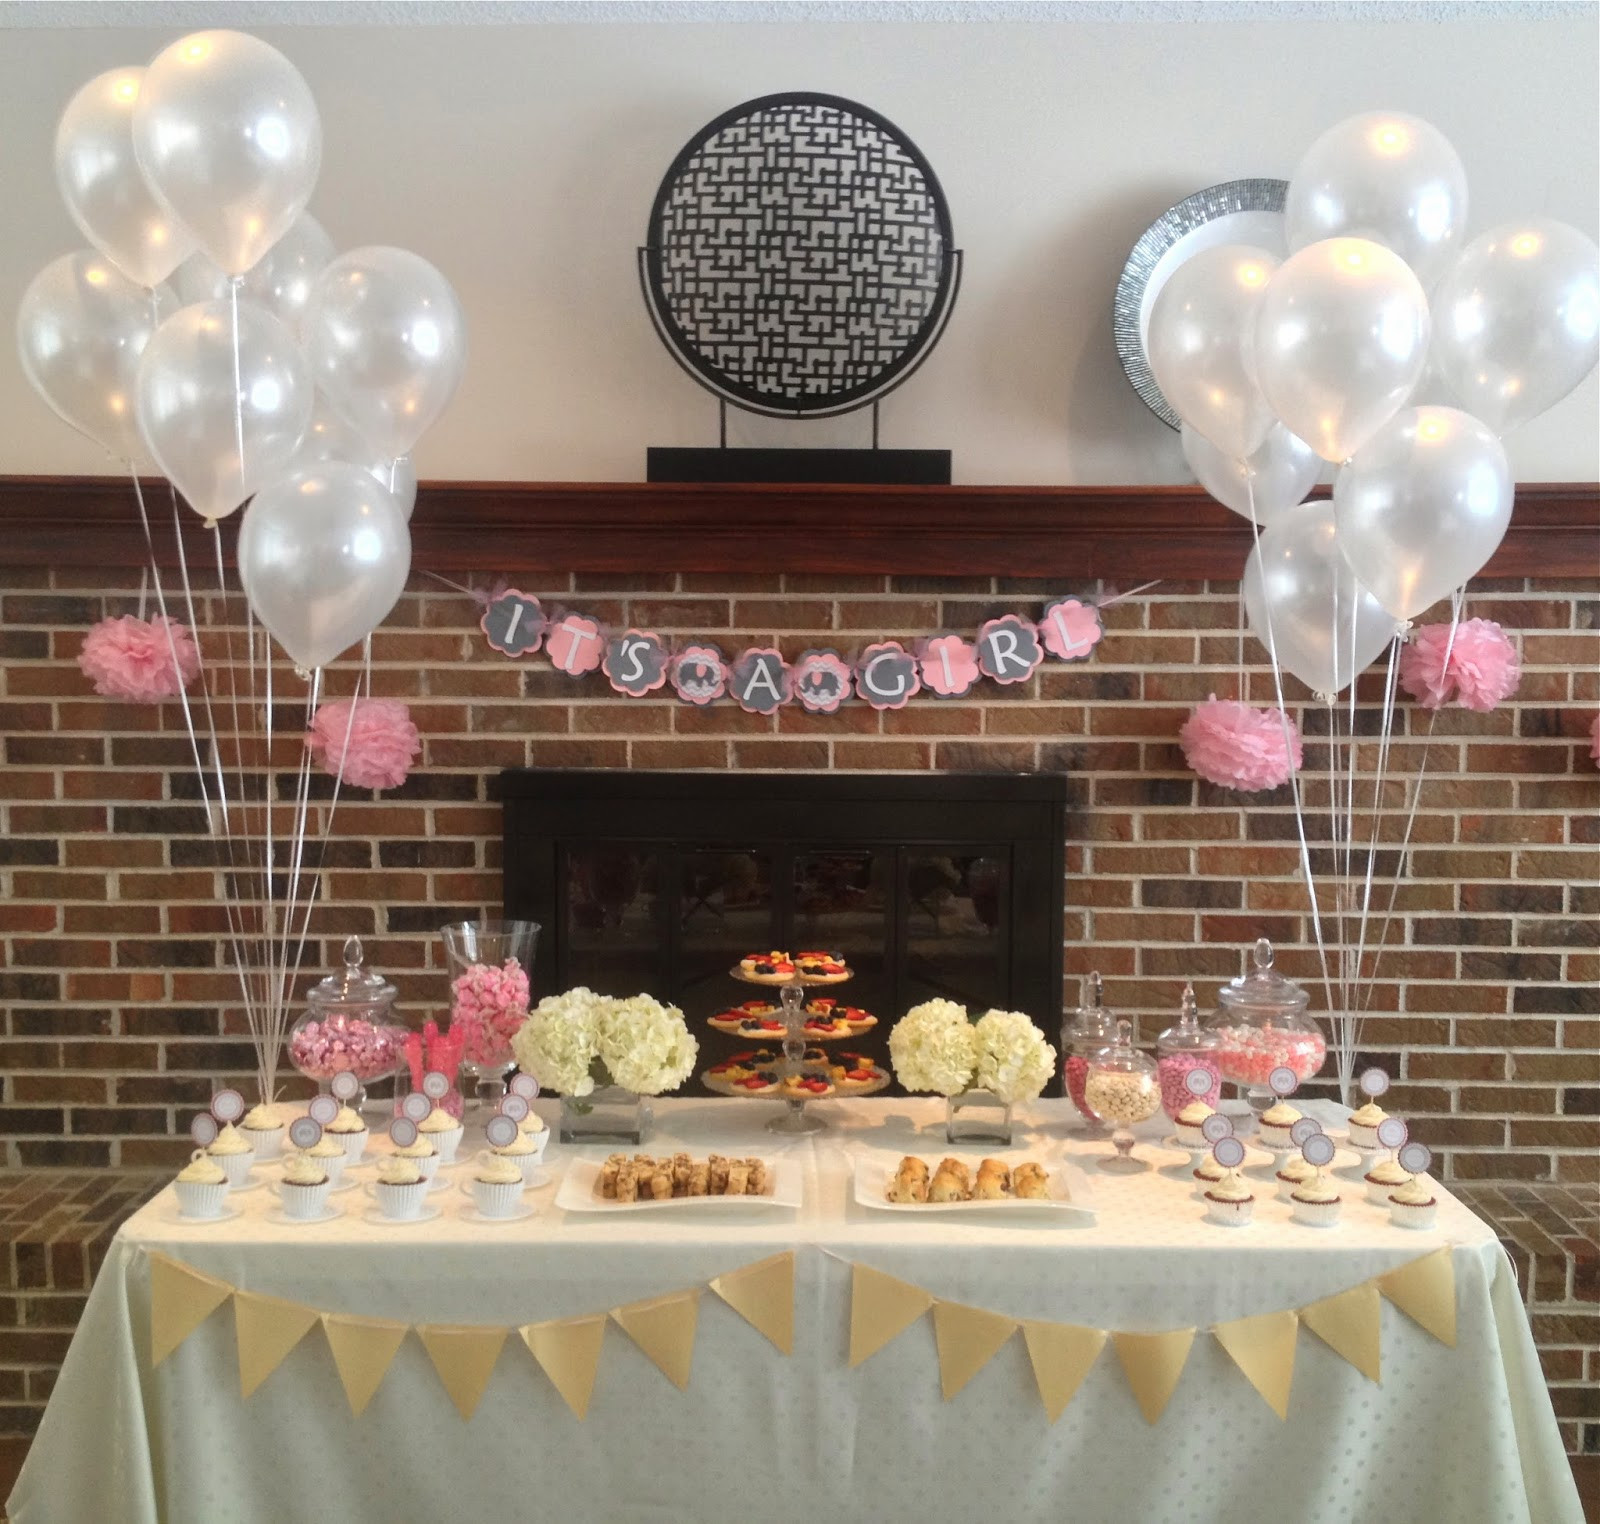 Tea Party Shower Ideas
 Eat with Grace Pink and Grey Tea Party Themed Baby Shower